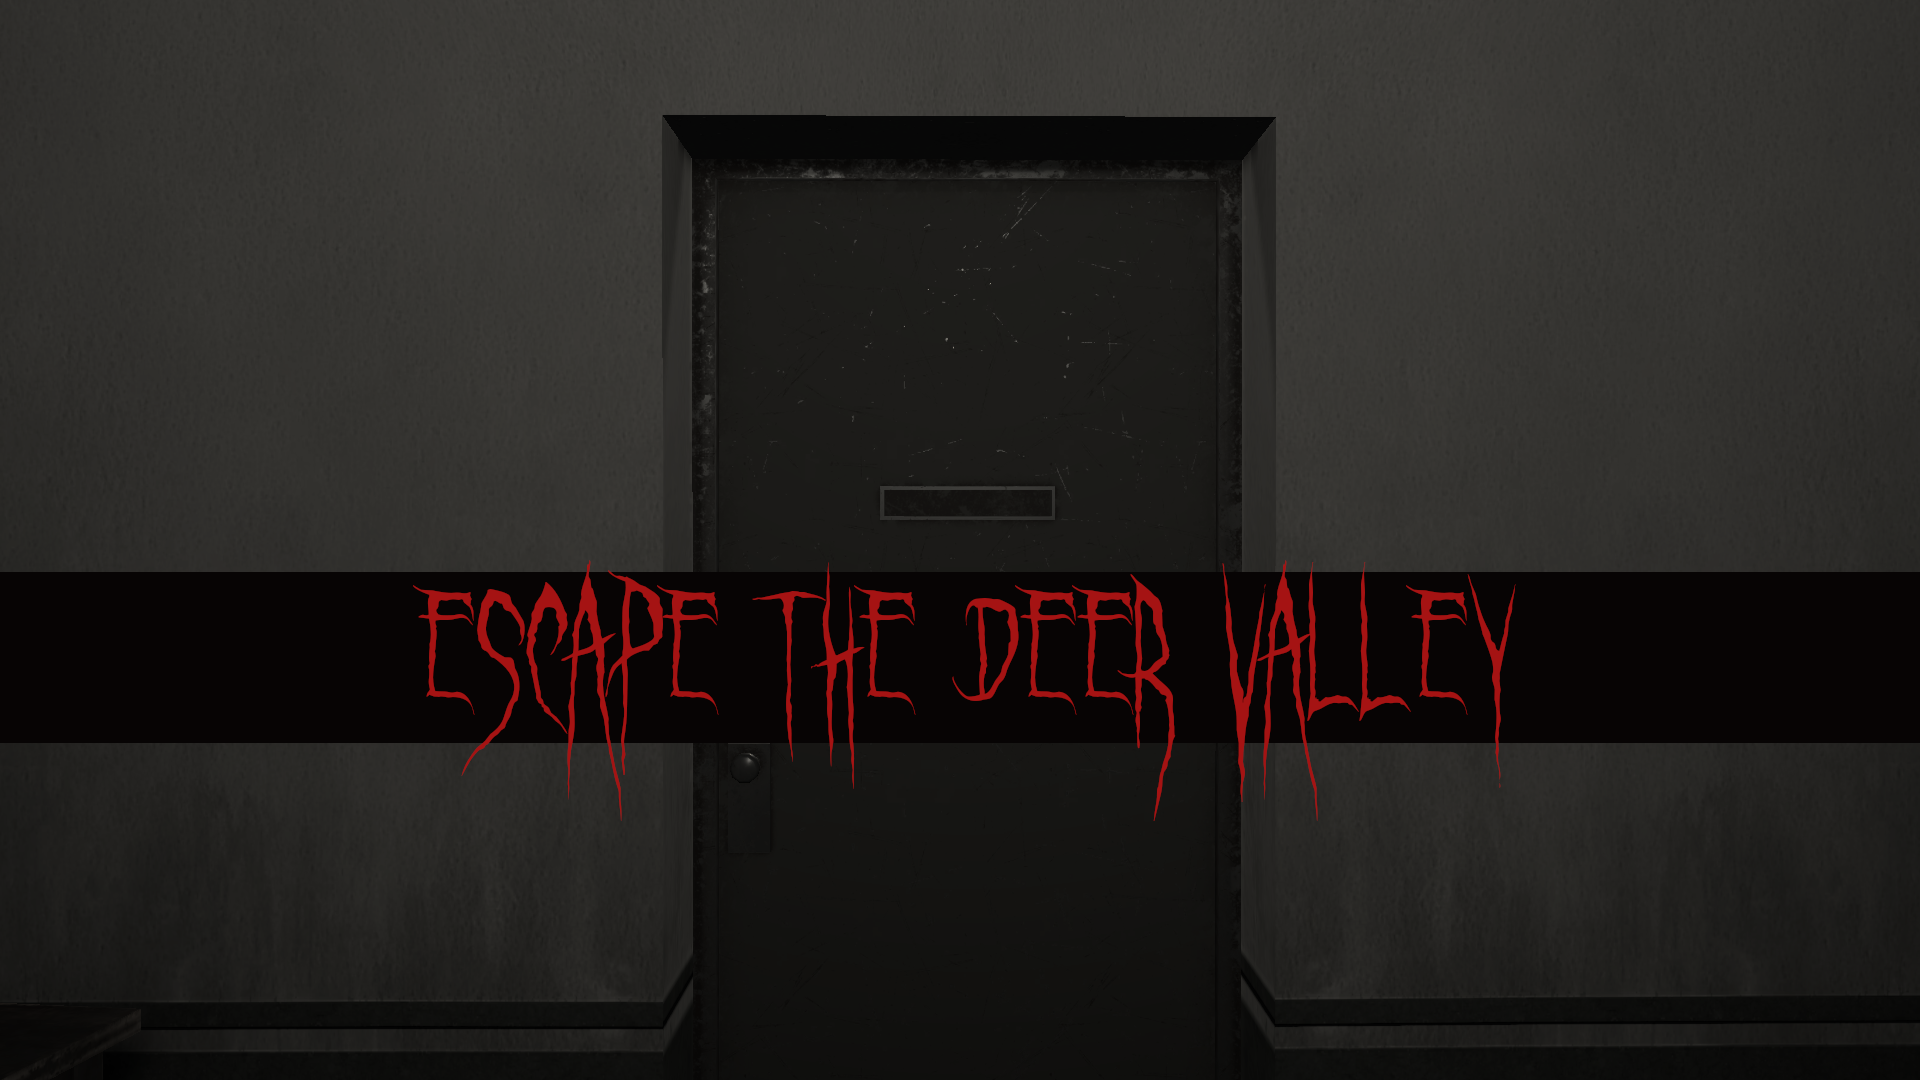 Escape the Deer Valley